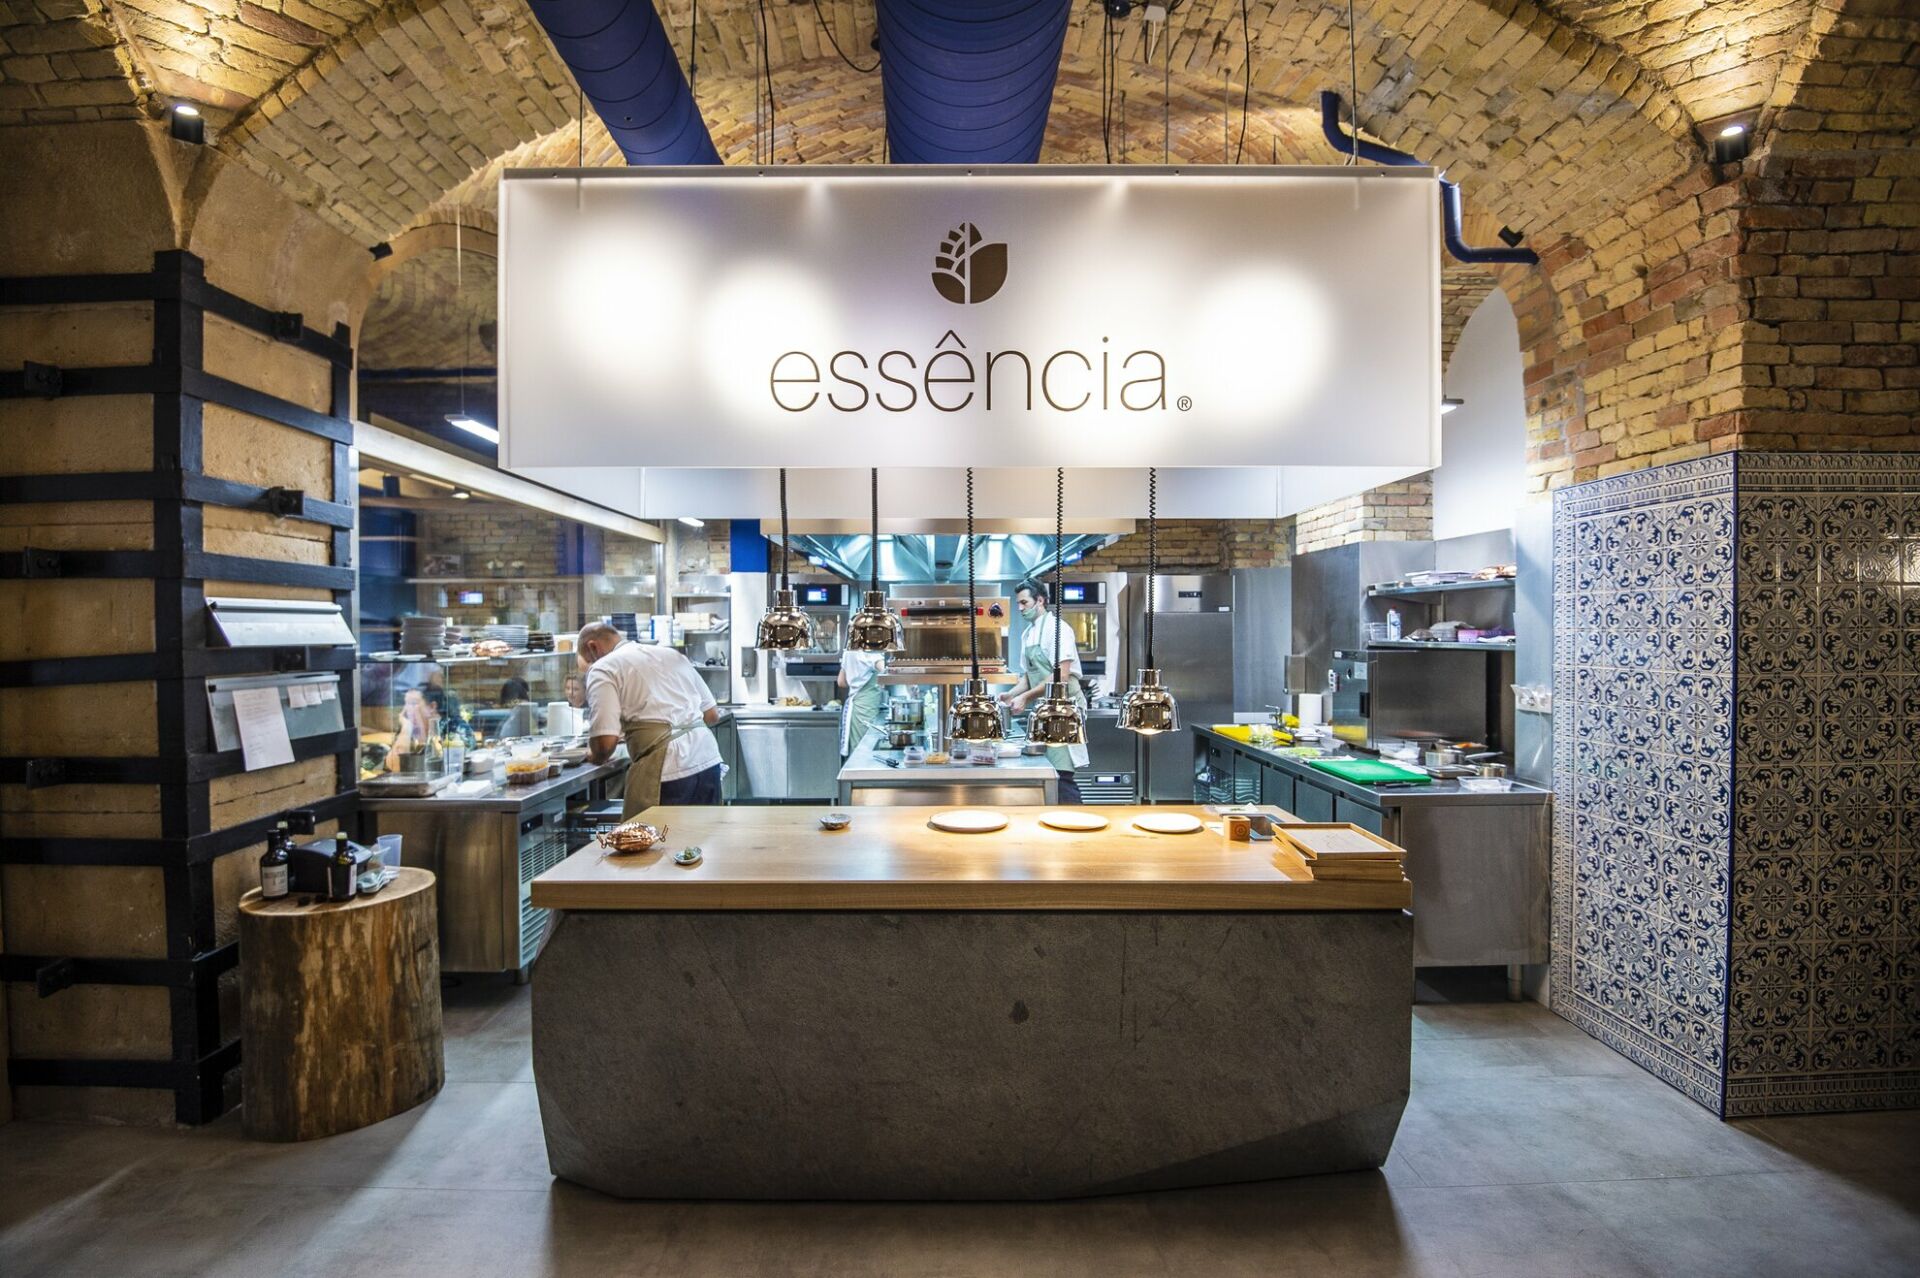 The kitchen of essência, on of the Michelin star restaurants in Budapest